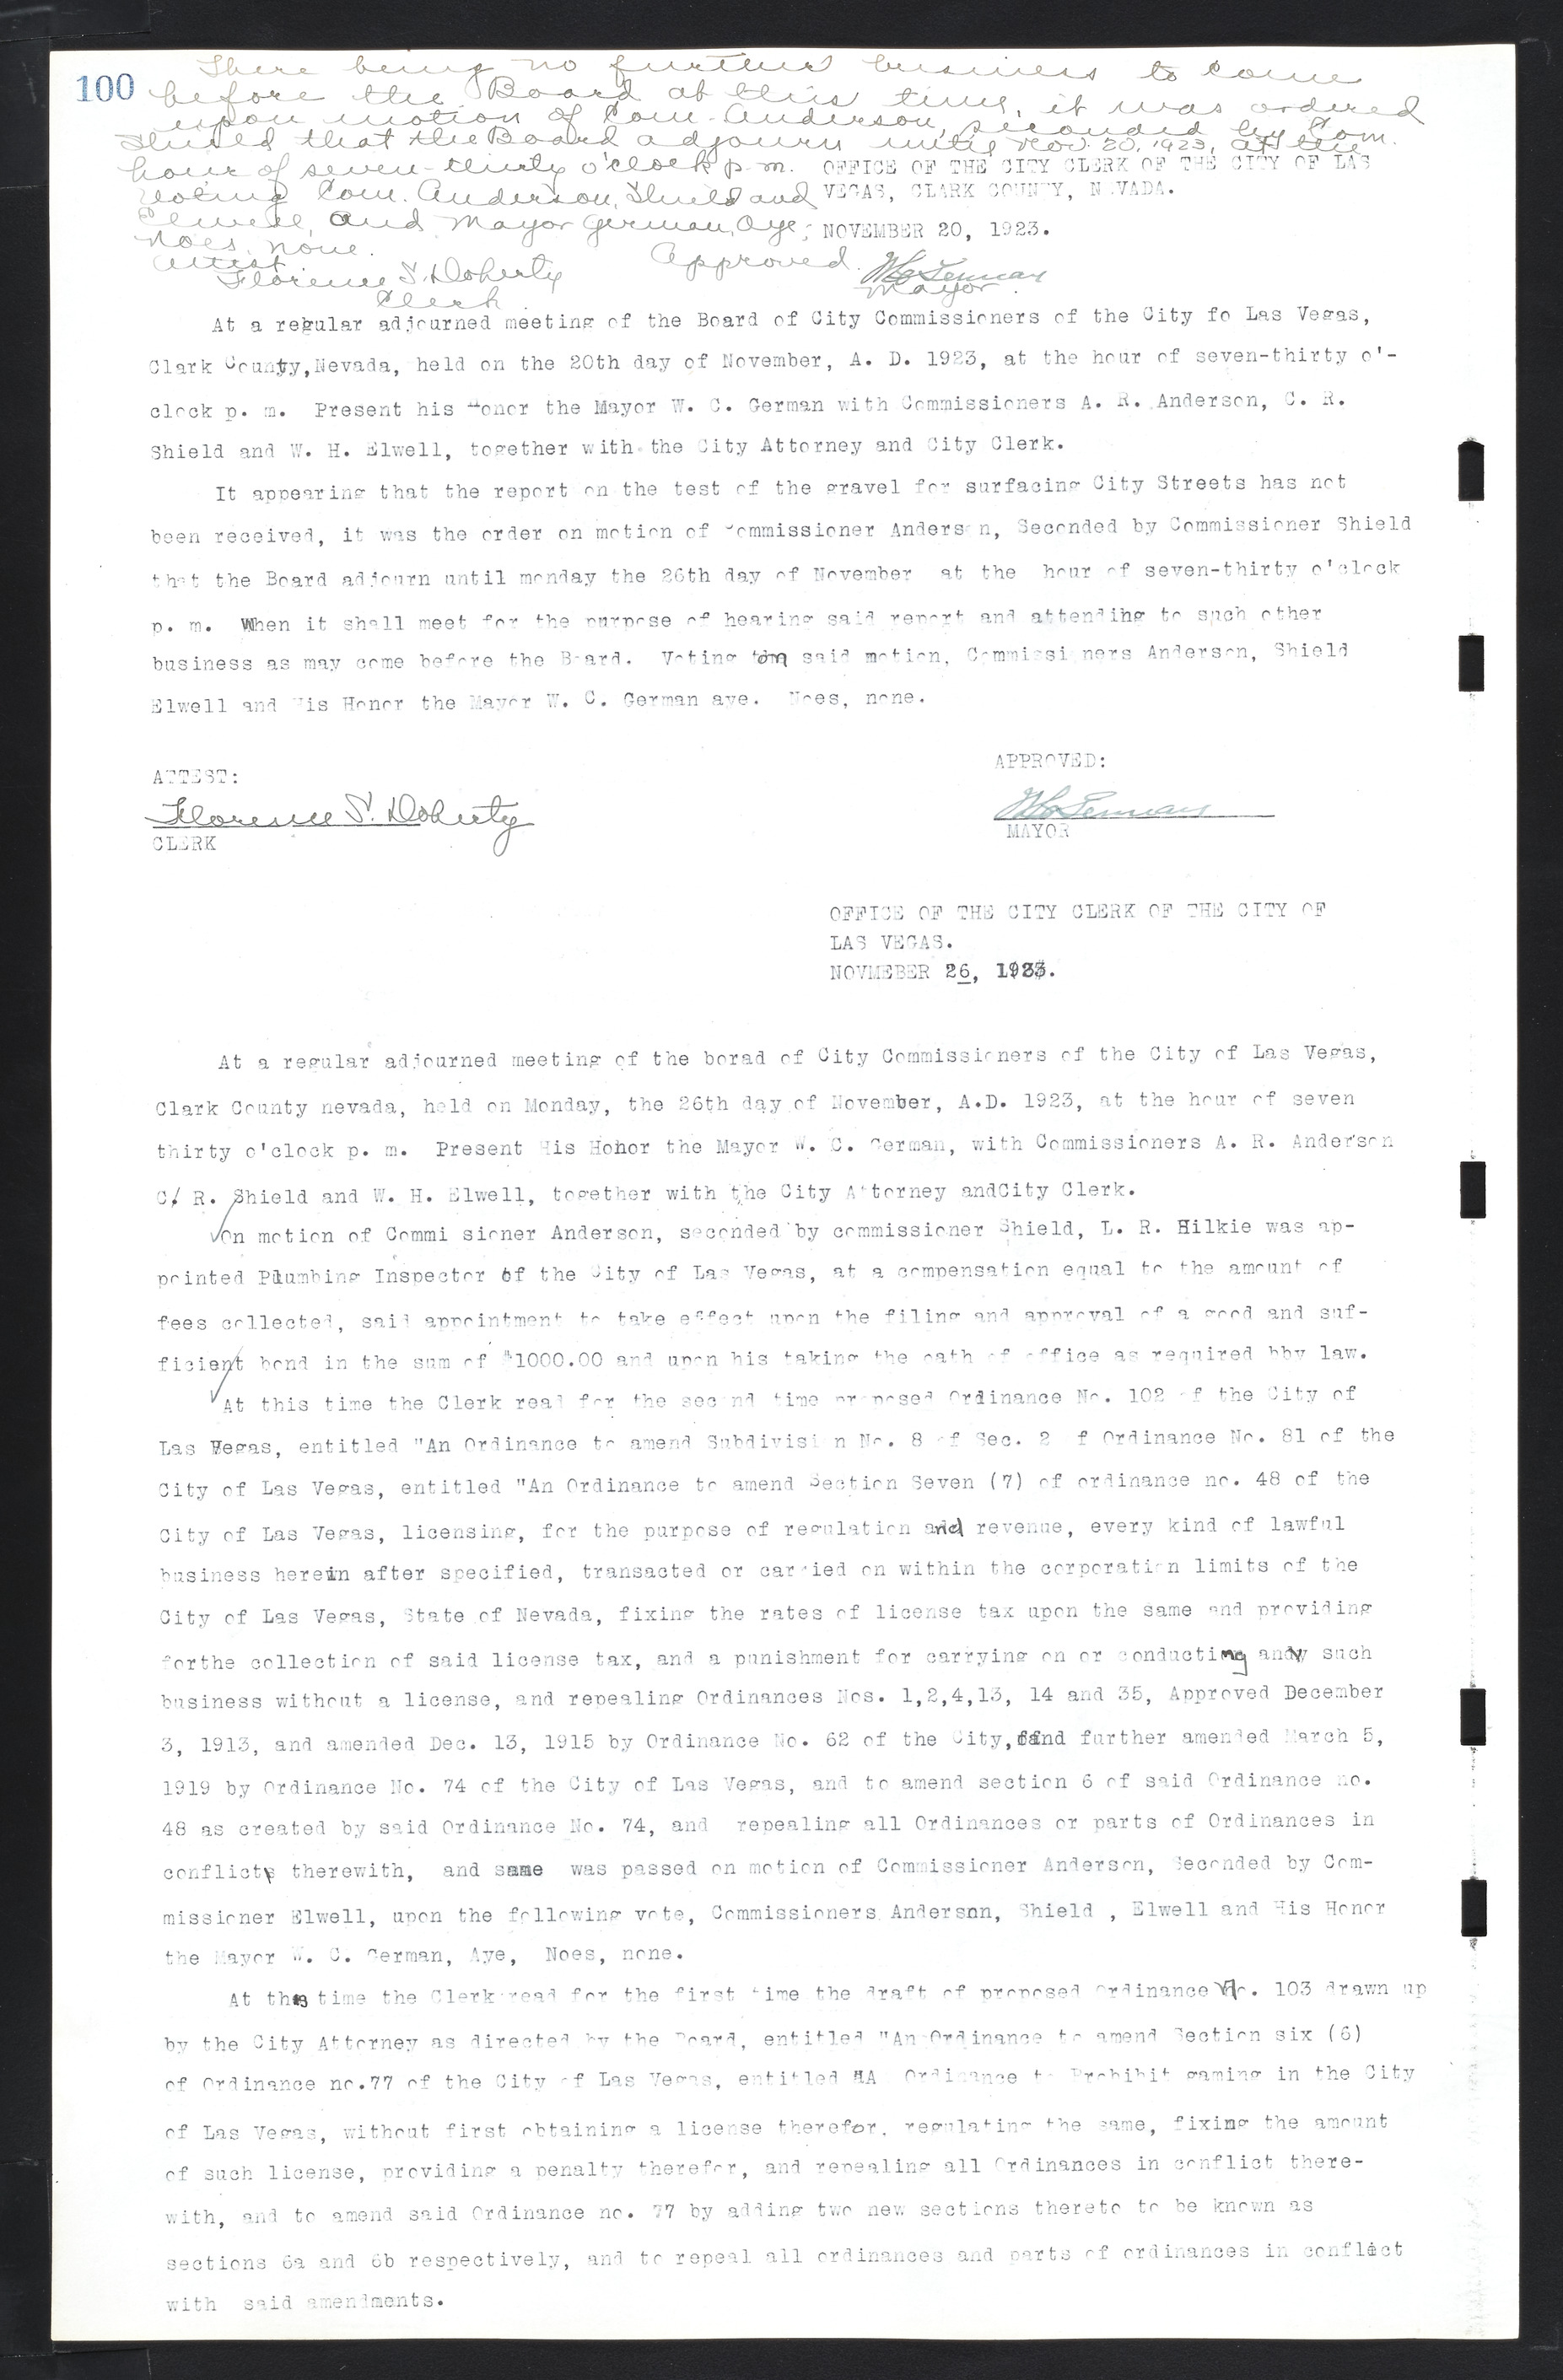 Las Vegas City Commission Minutes, March 1, 1922 to May 10, 1929, lvc000002-107